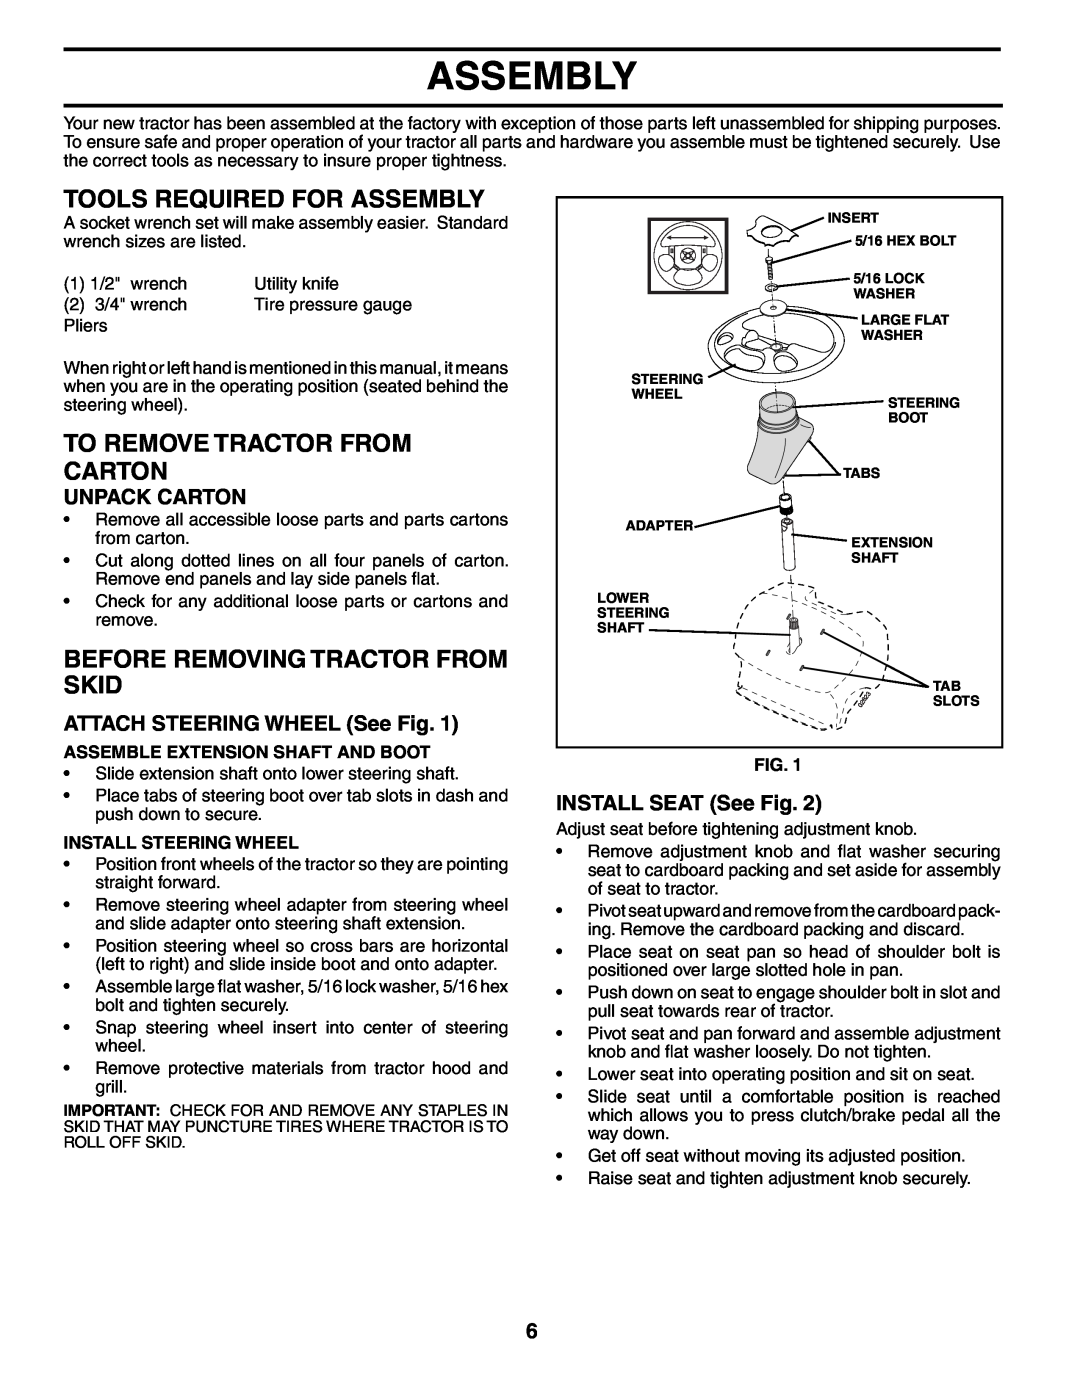 Poulan 960120003 manual Tools Required For Assembly, To Remove Tractor From Carton, Before Removing Tractor From Skid 